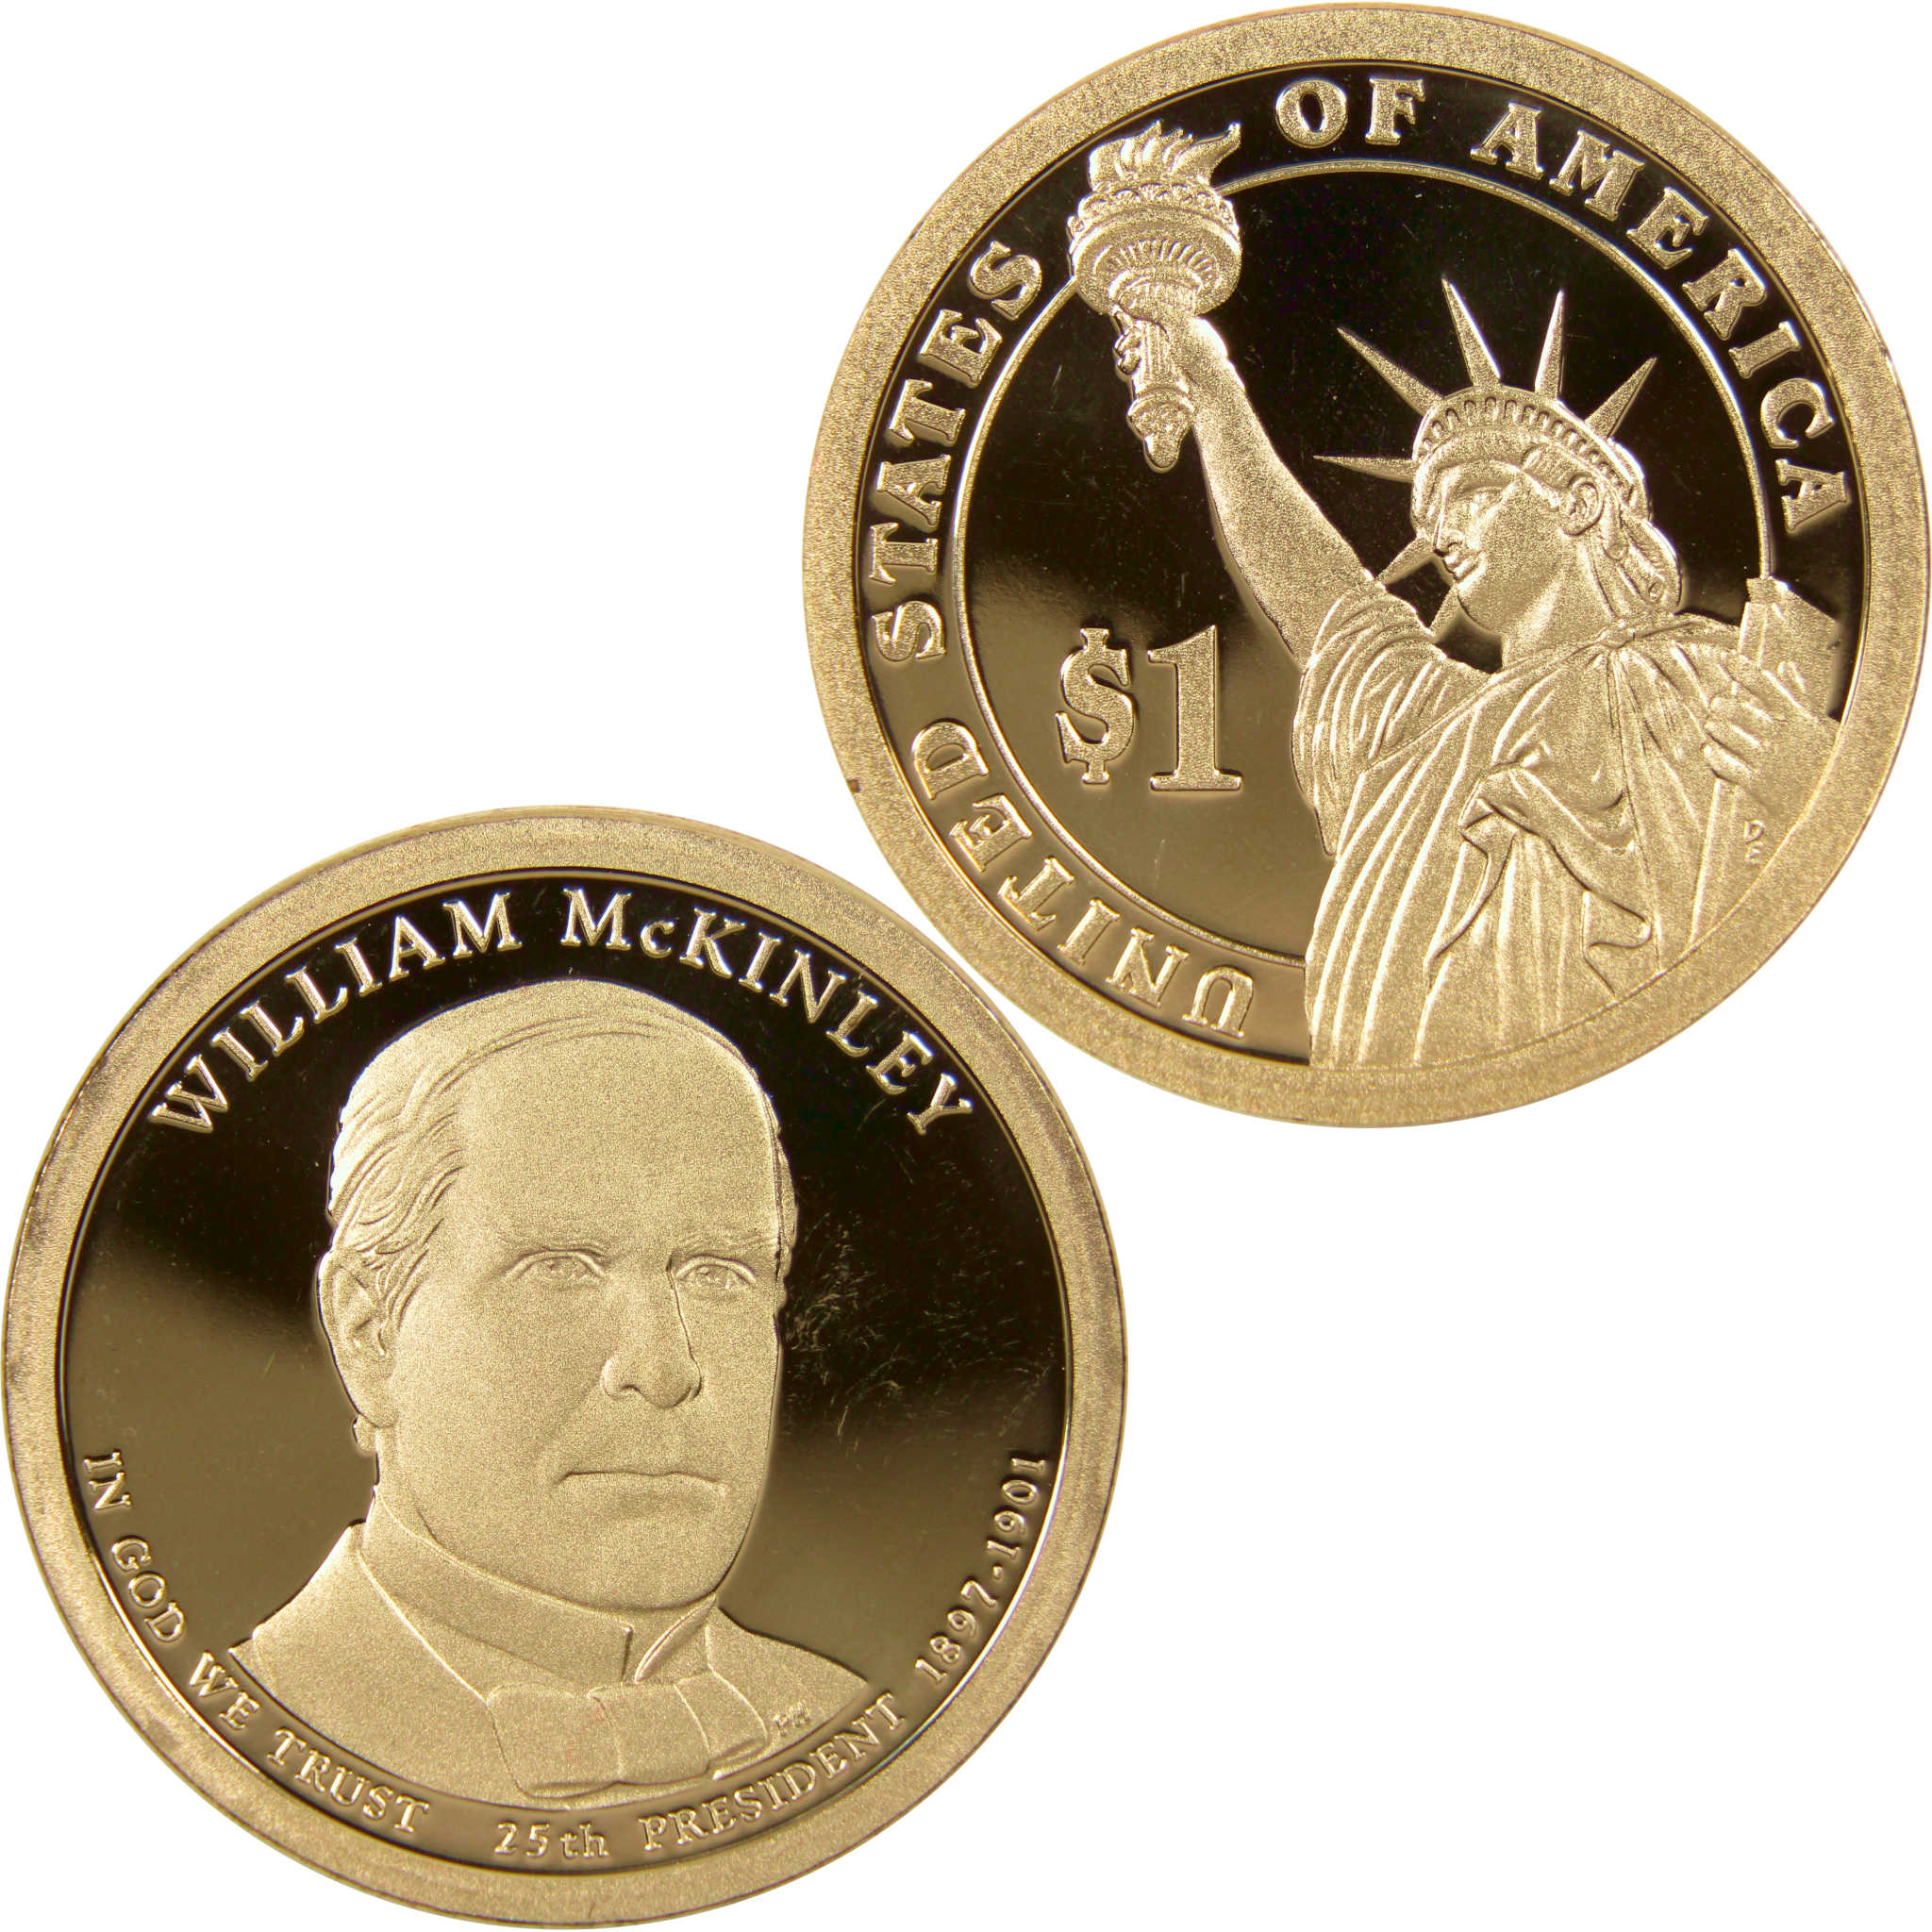 2013 S William McKinley Presidential Dollar Choice Proof $1 Coin